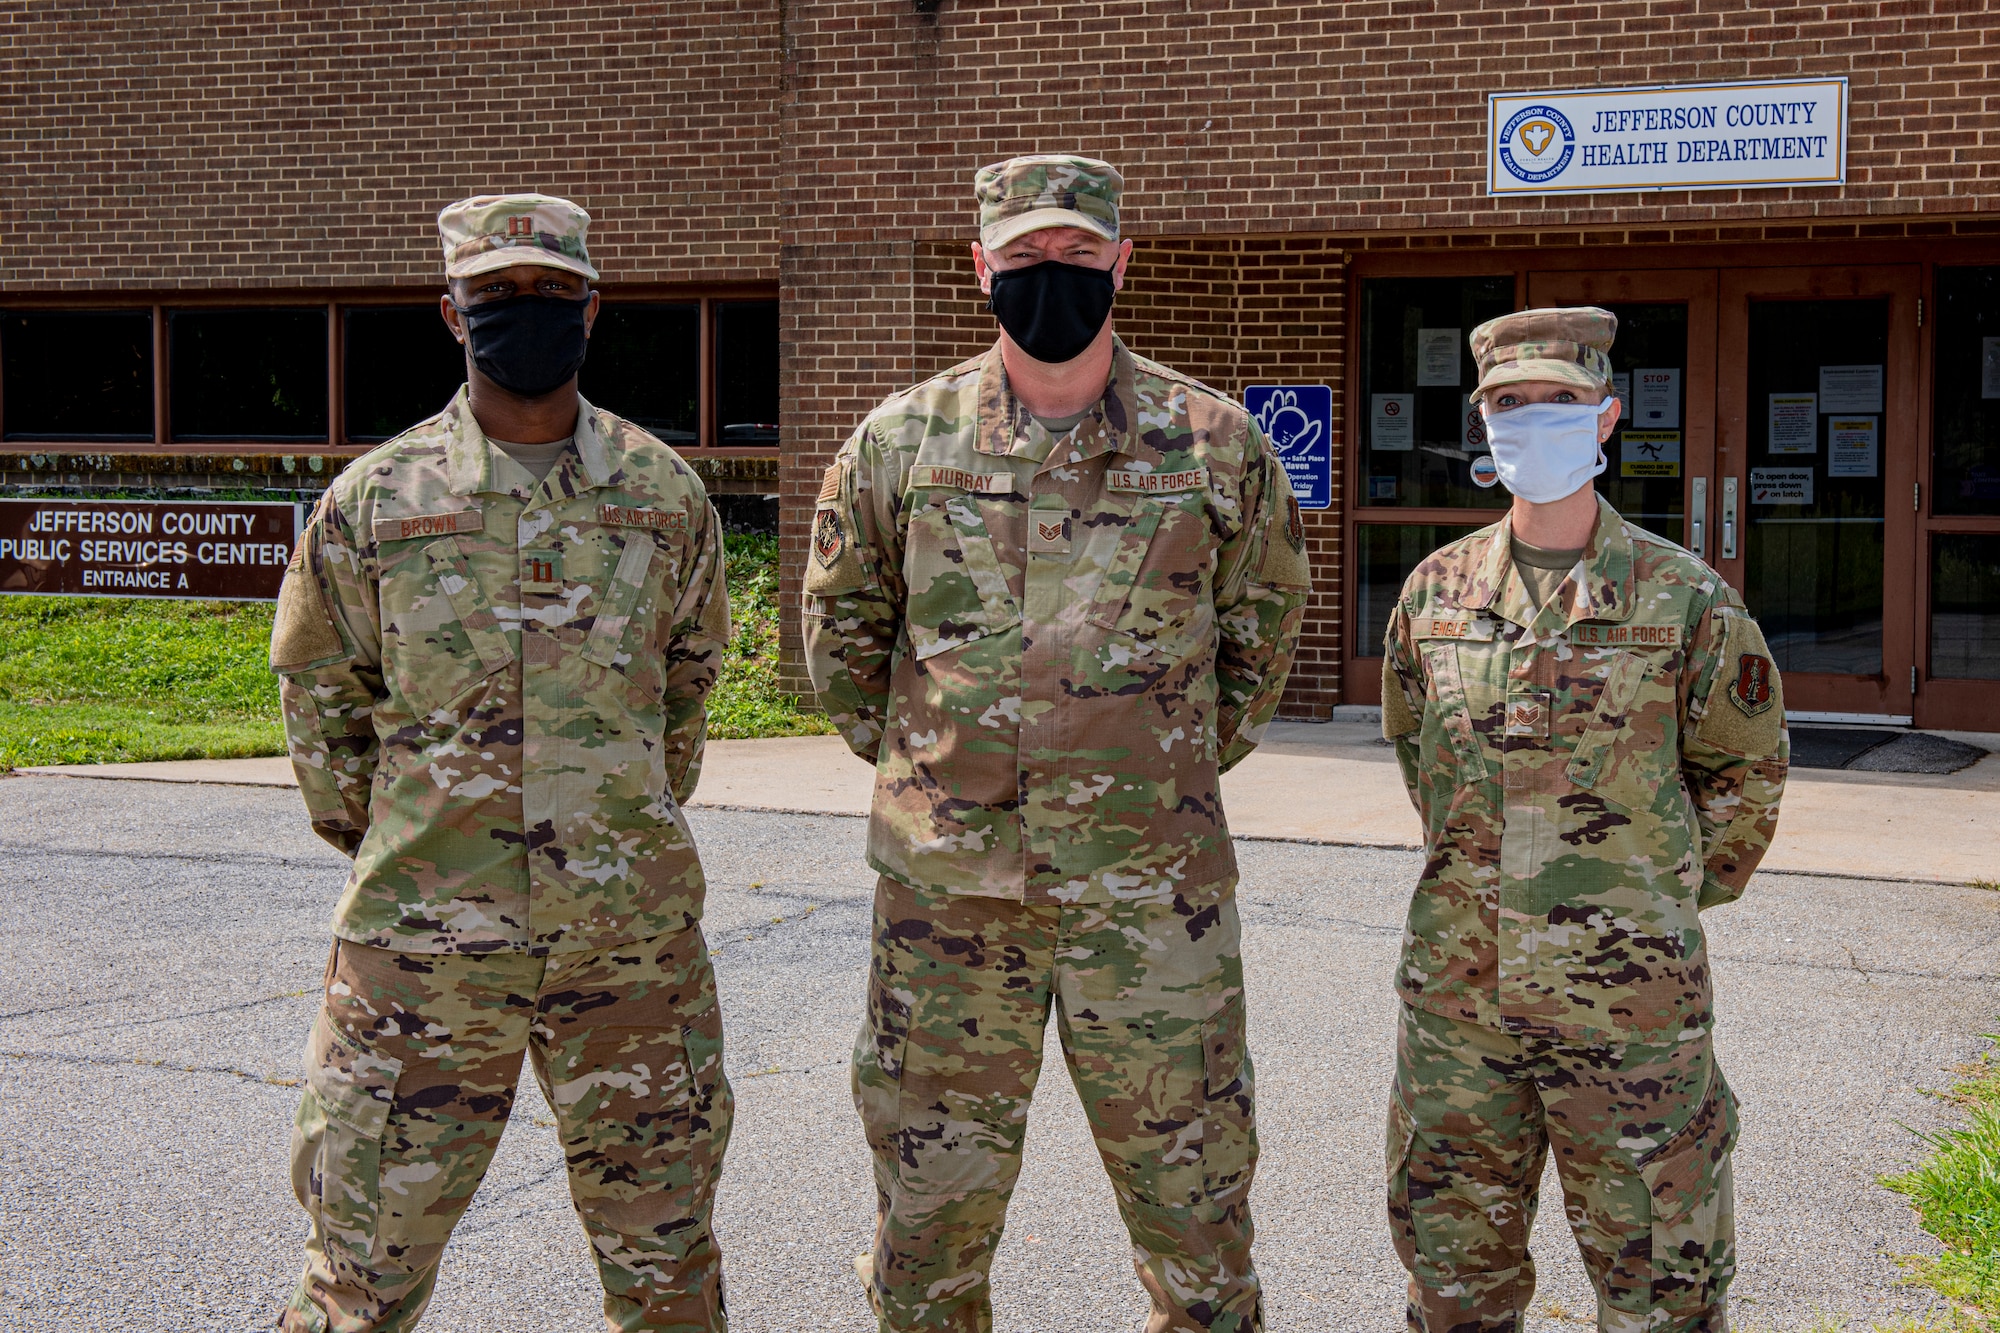 Three members of the West Virginia National Guard's 167th Airlift Wing, from left, Capt. Rodney Brown, Staff Sgt. James Murray, and Staff Sgt. Erin Engle, are part of the COVID-19 contact tracing team at the Jefferson County Health Department, Martinsburg, W.Va., Aug. 20, 2020.